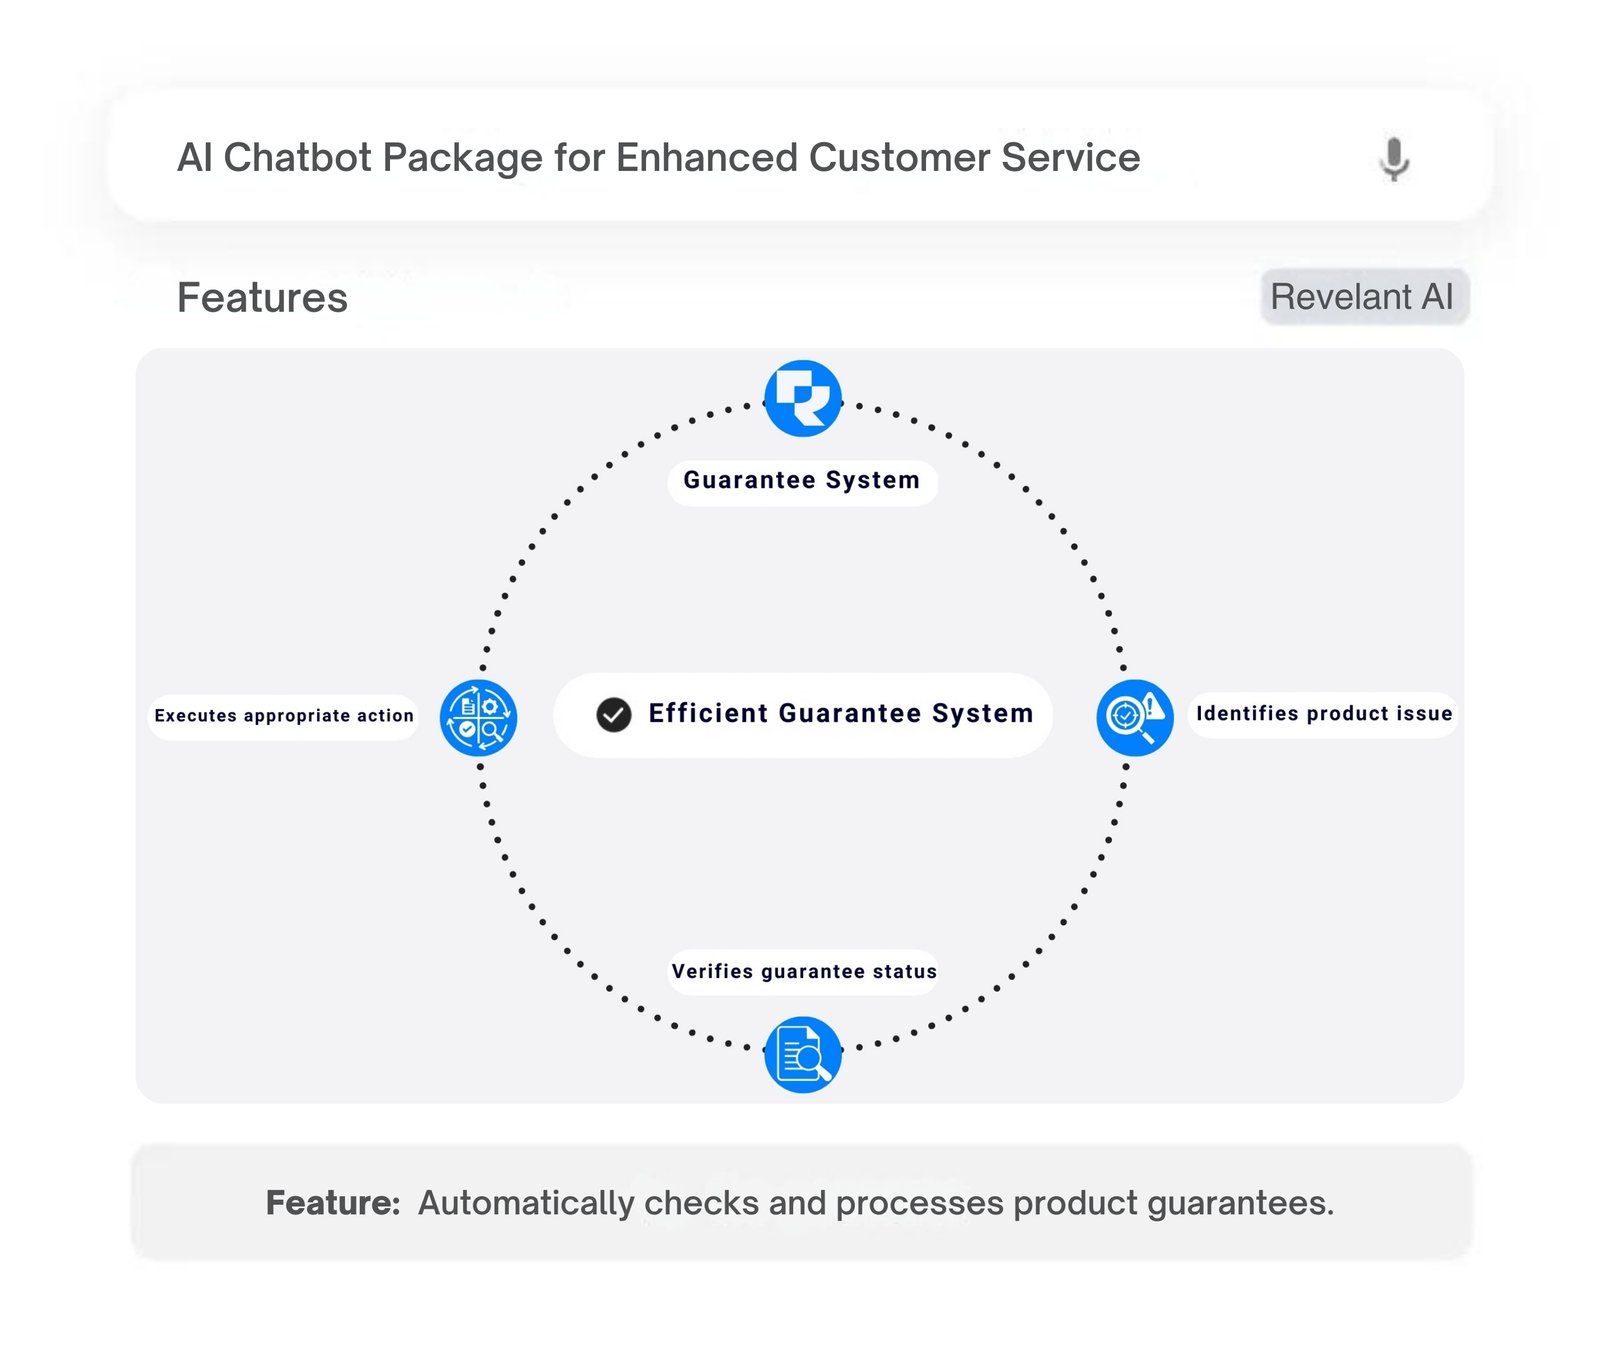 AI chatbot's guarantee system identifies product issues, verifies guarantee status, and executes appropriate action.